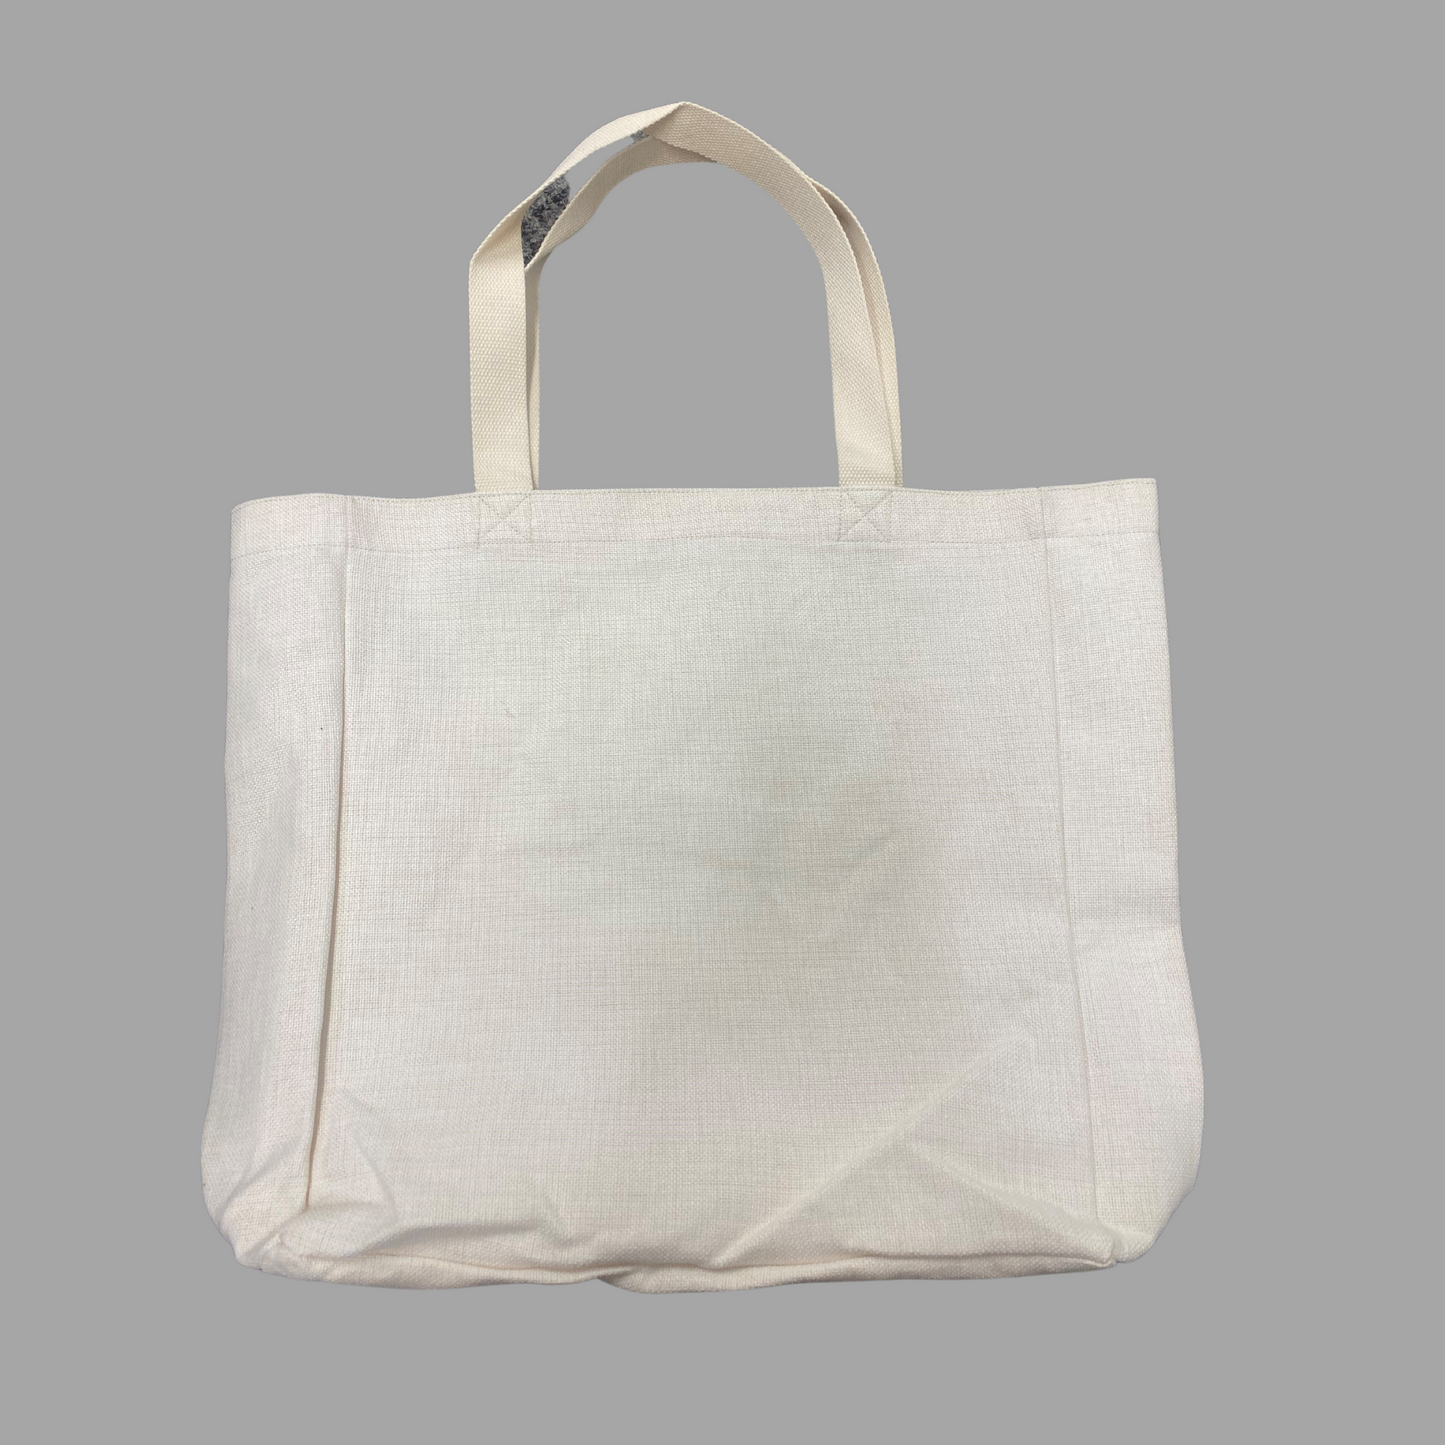 Easter Tote Bags